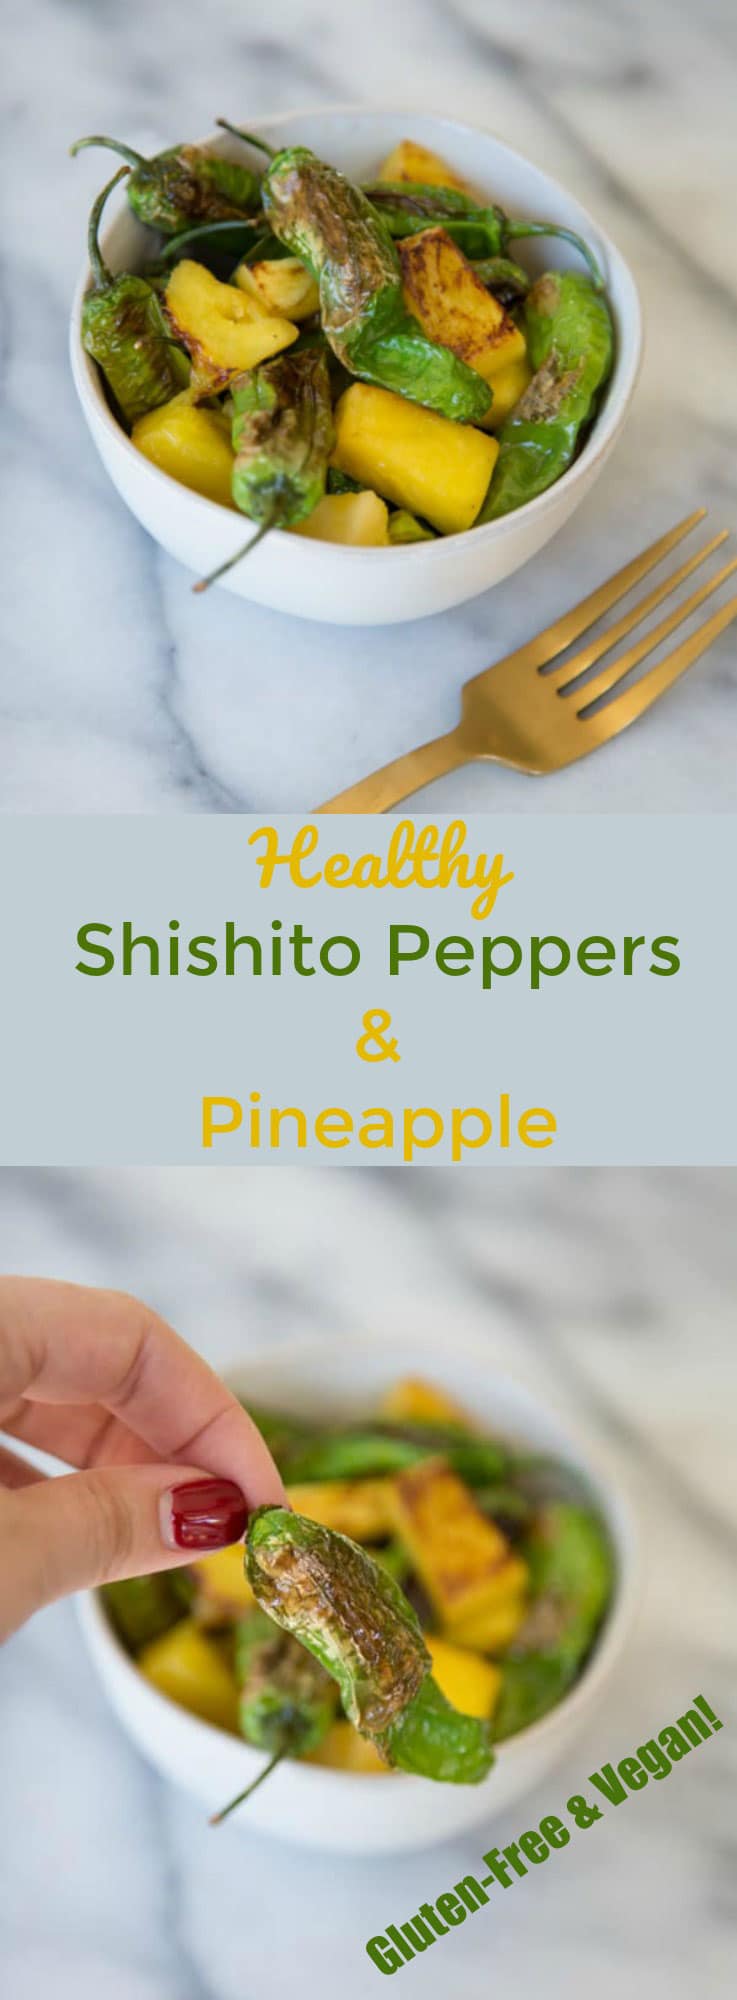 Healthy, gluten-free, and vegan pan roasted shishito peppers and pineapple! The perfect low calorie snack or appetizer